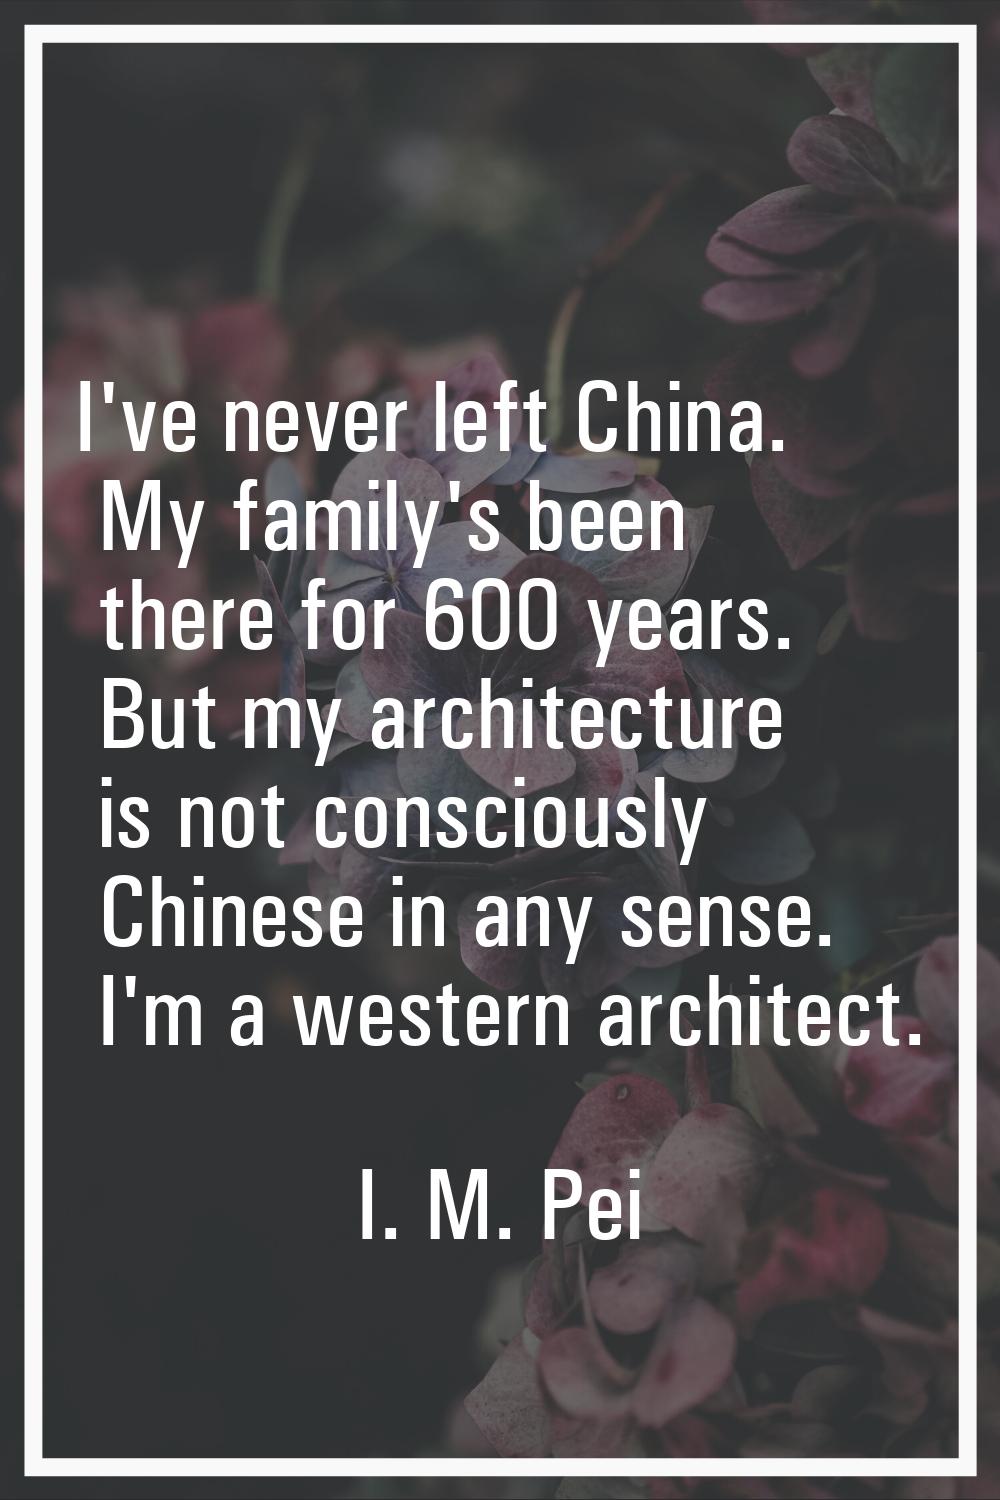 I've never left China. My family's been there for 600 years. But my architecture is not consciously